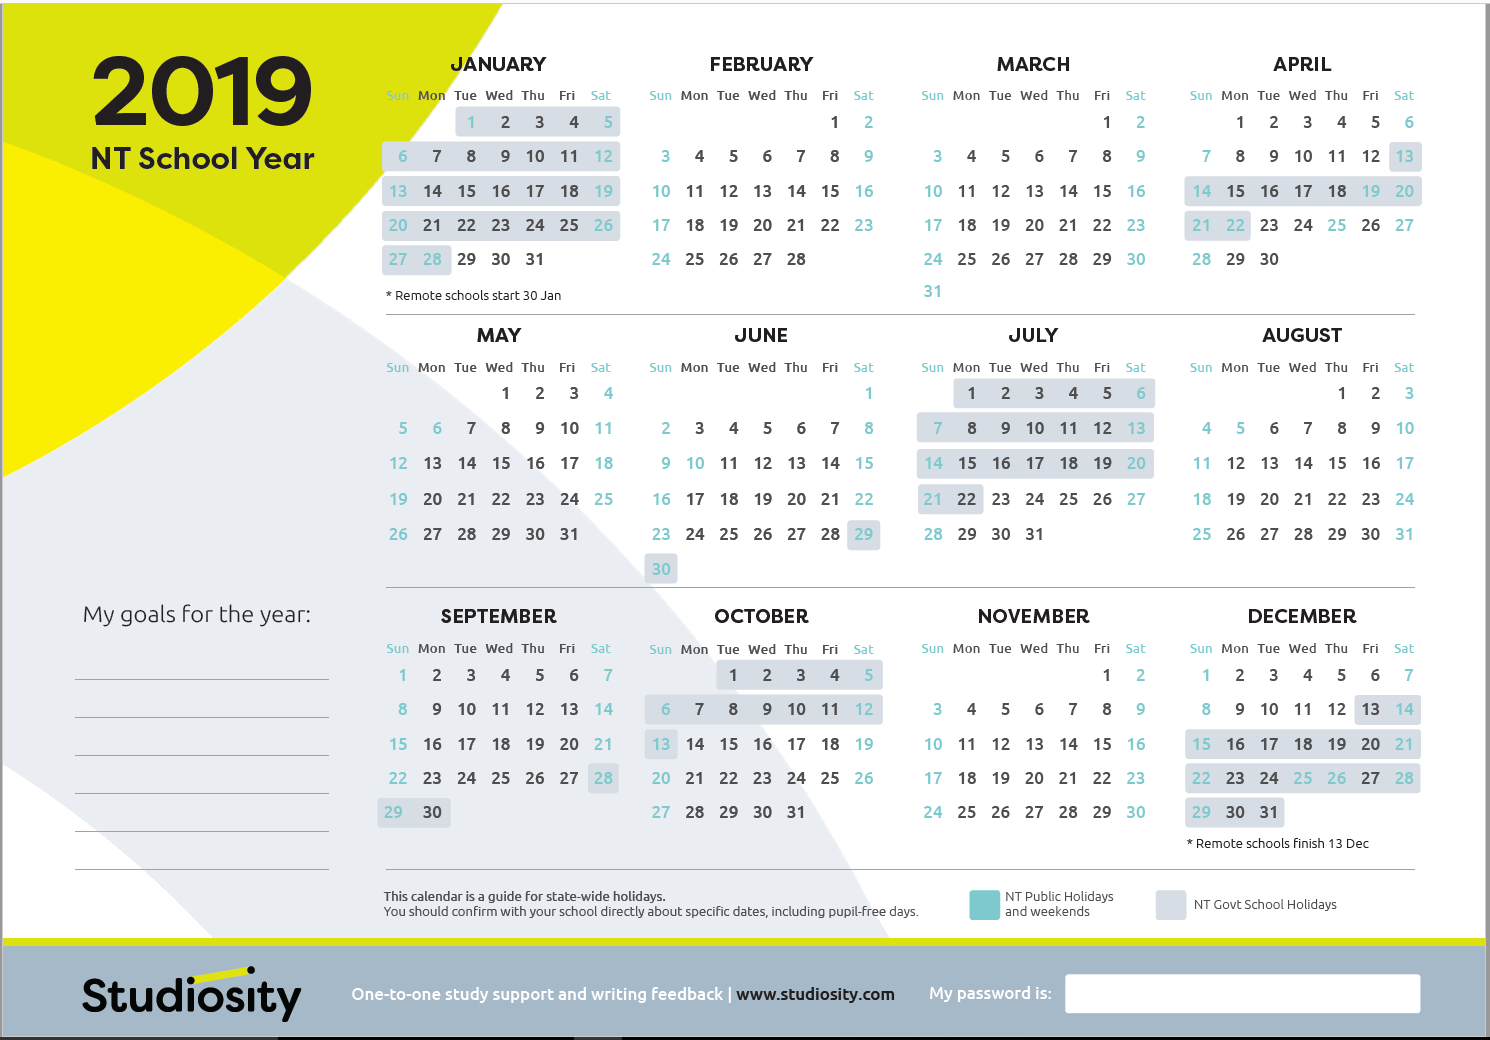 School terms and public holiday dates for NT in 2019 Studiosity